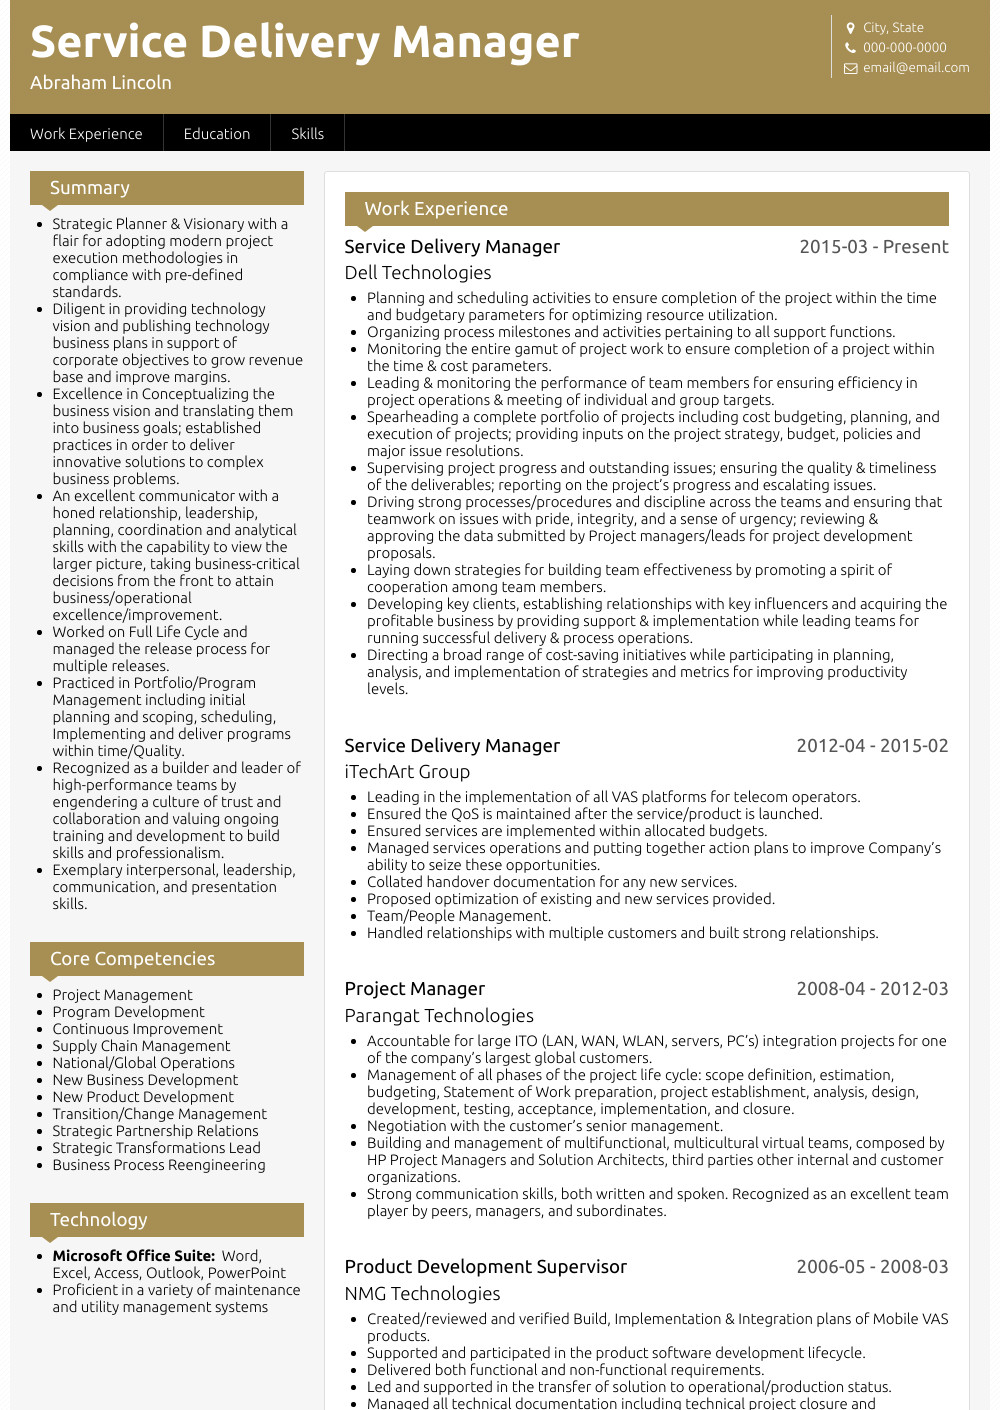 Sample Service Delivery Manager Resume Download Service Delivery Manager Resume Samples and Templates